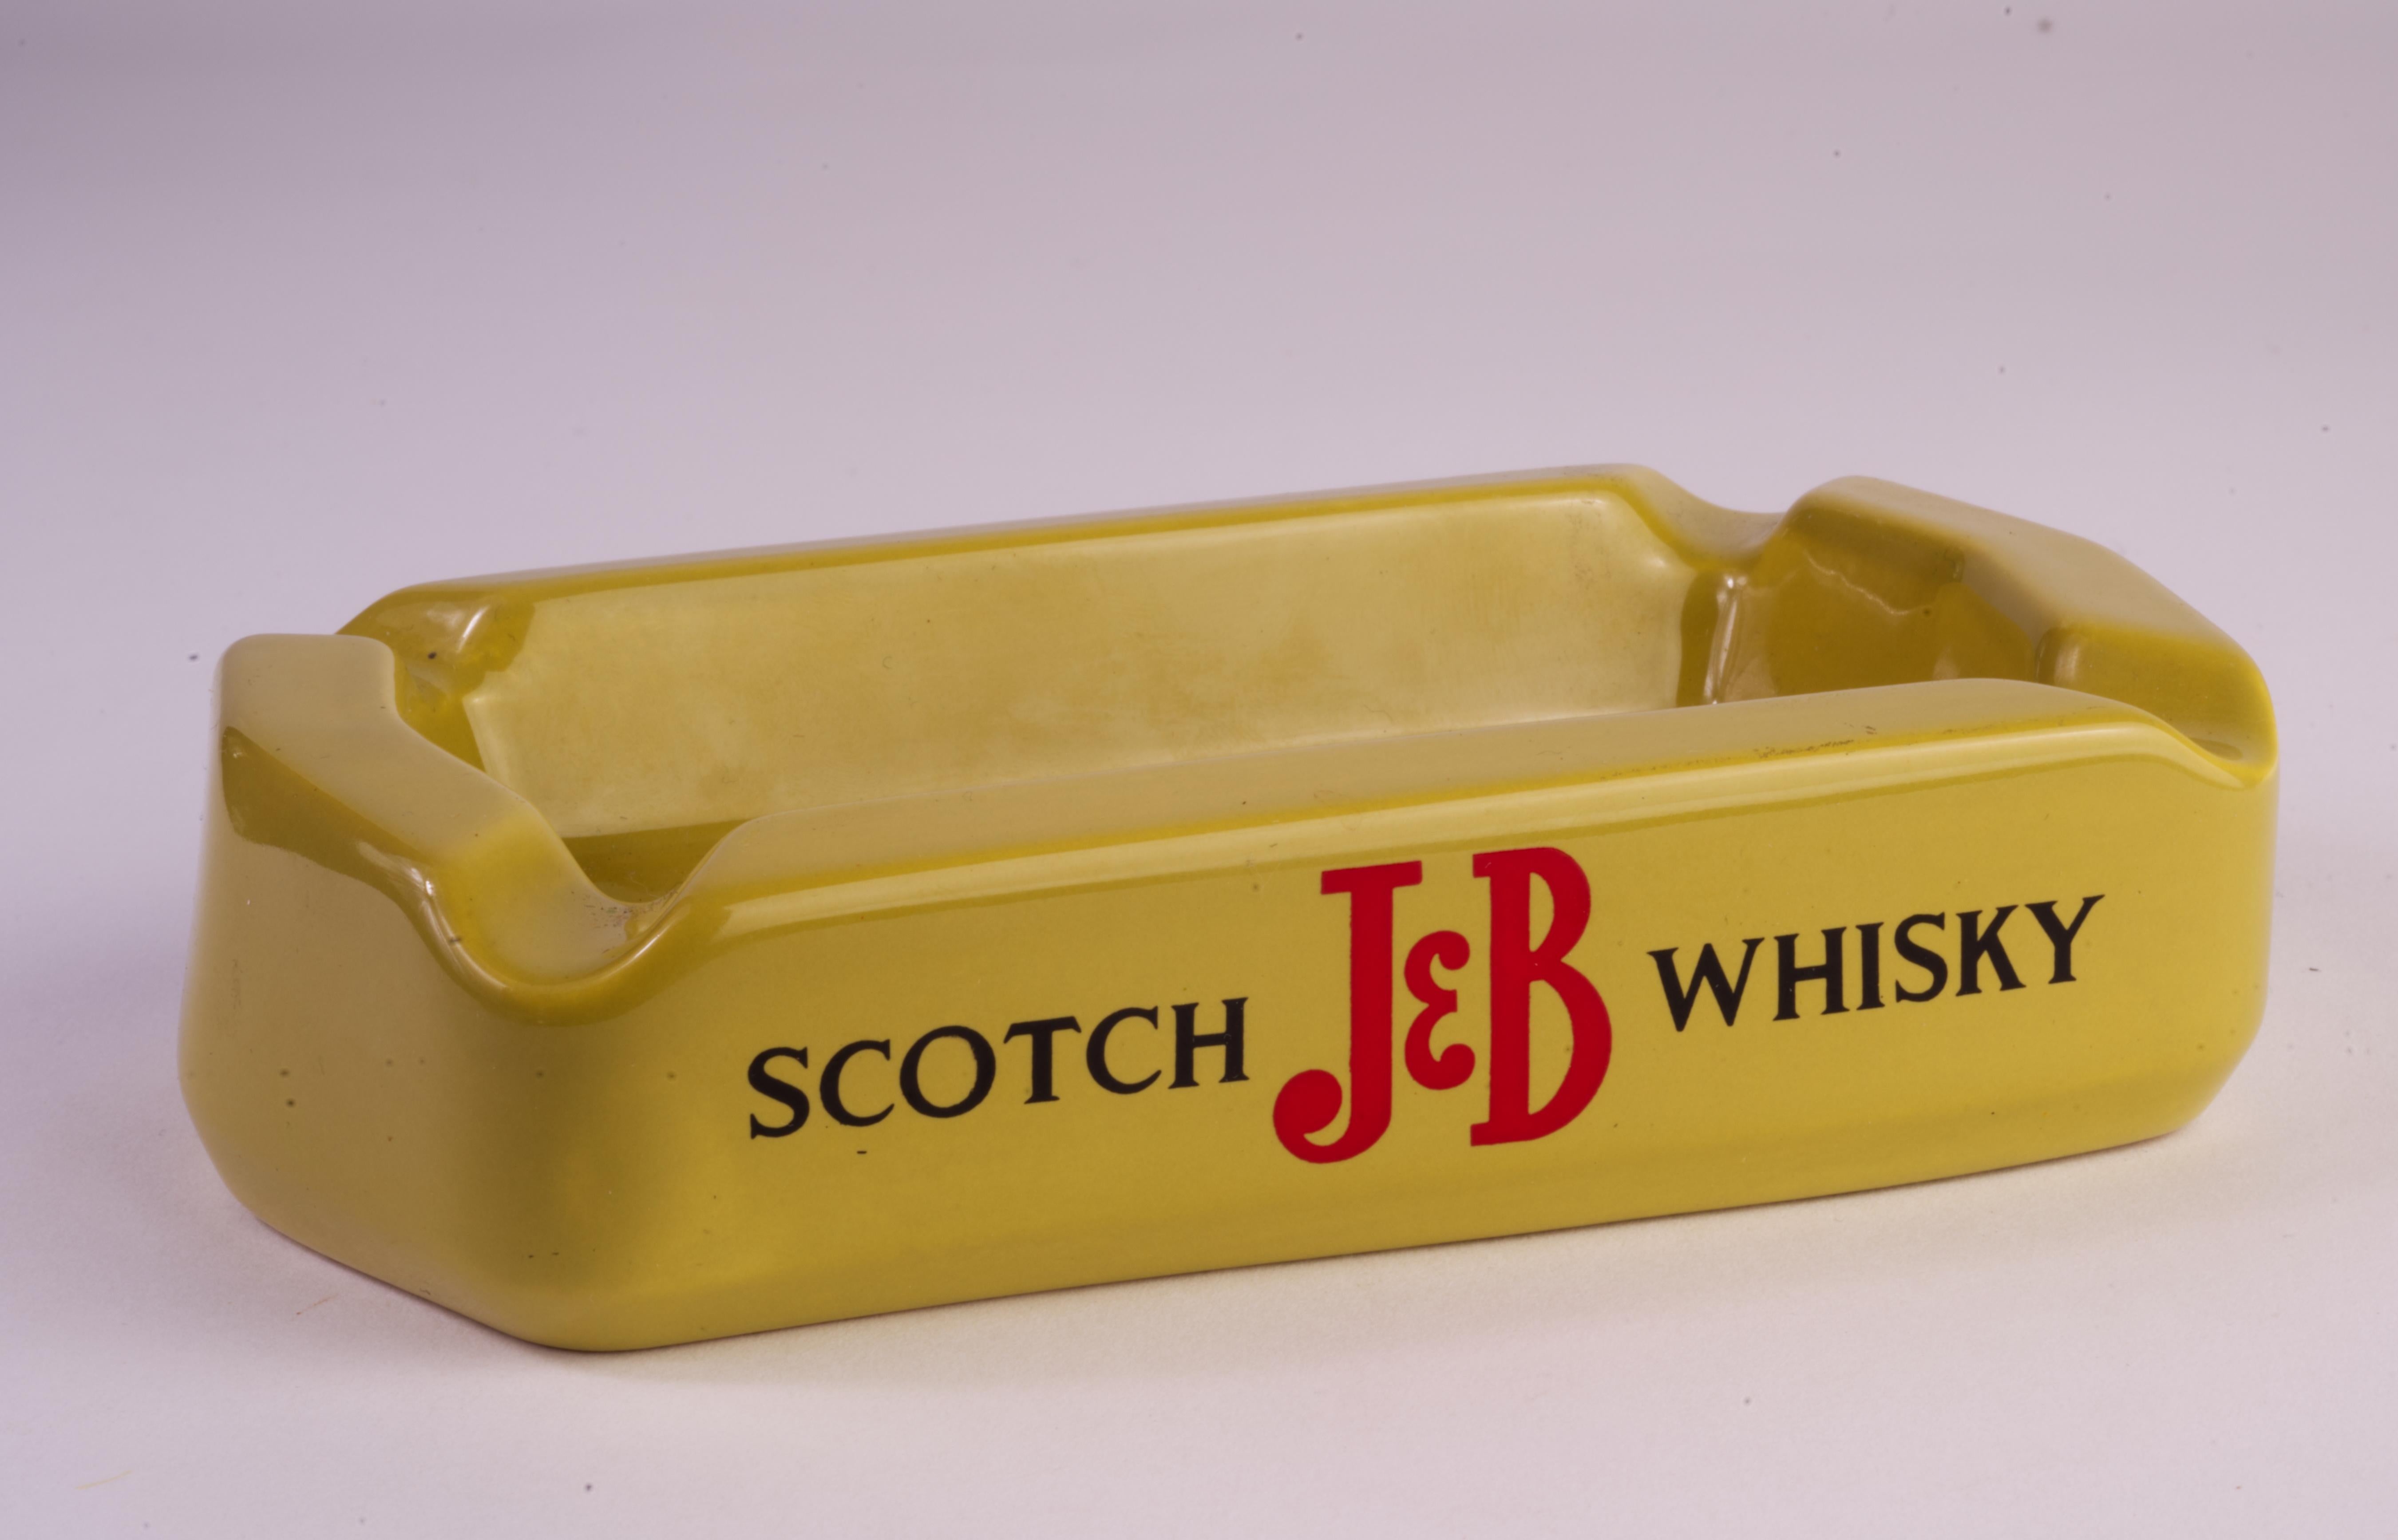 Mid Century Modern Wade Pottery England J&B Scotch Whisky Ceramic Ashtray In Good Condition For Sale In Clifton Springs, NY